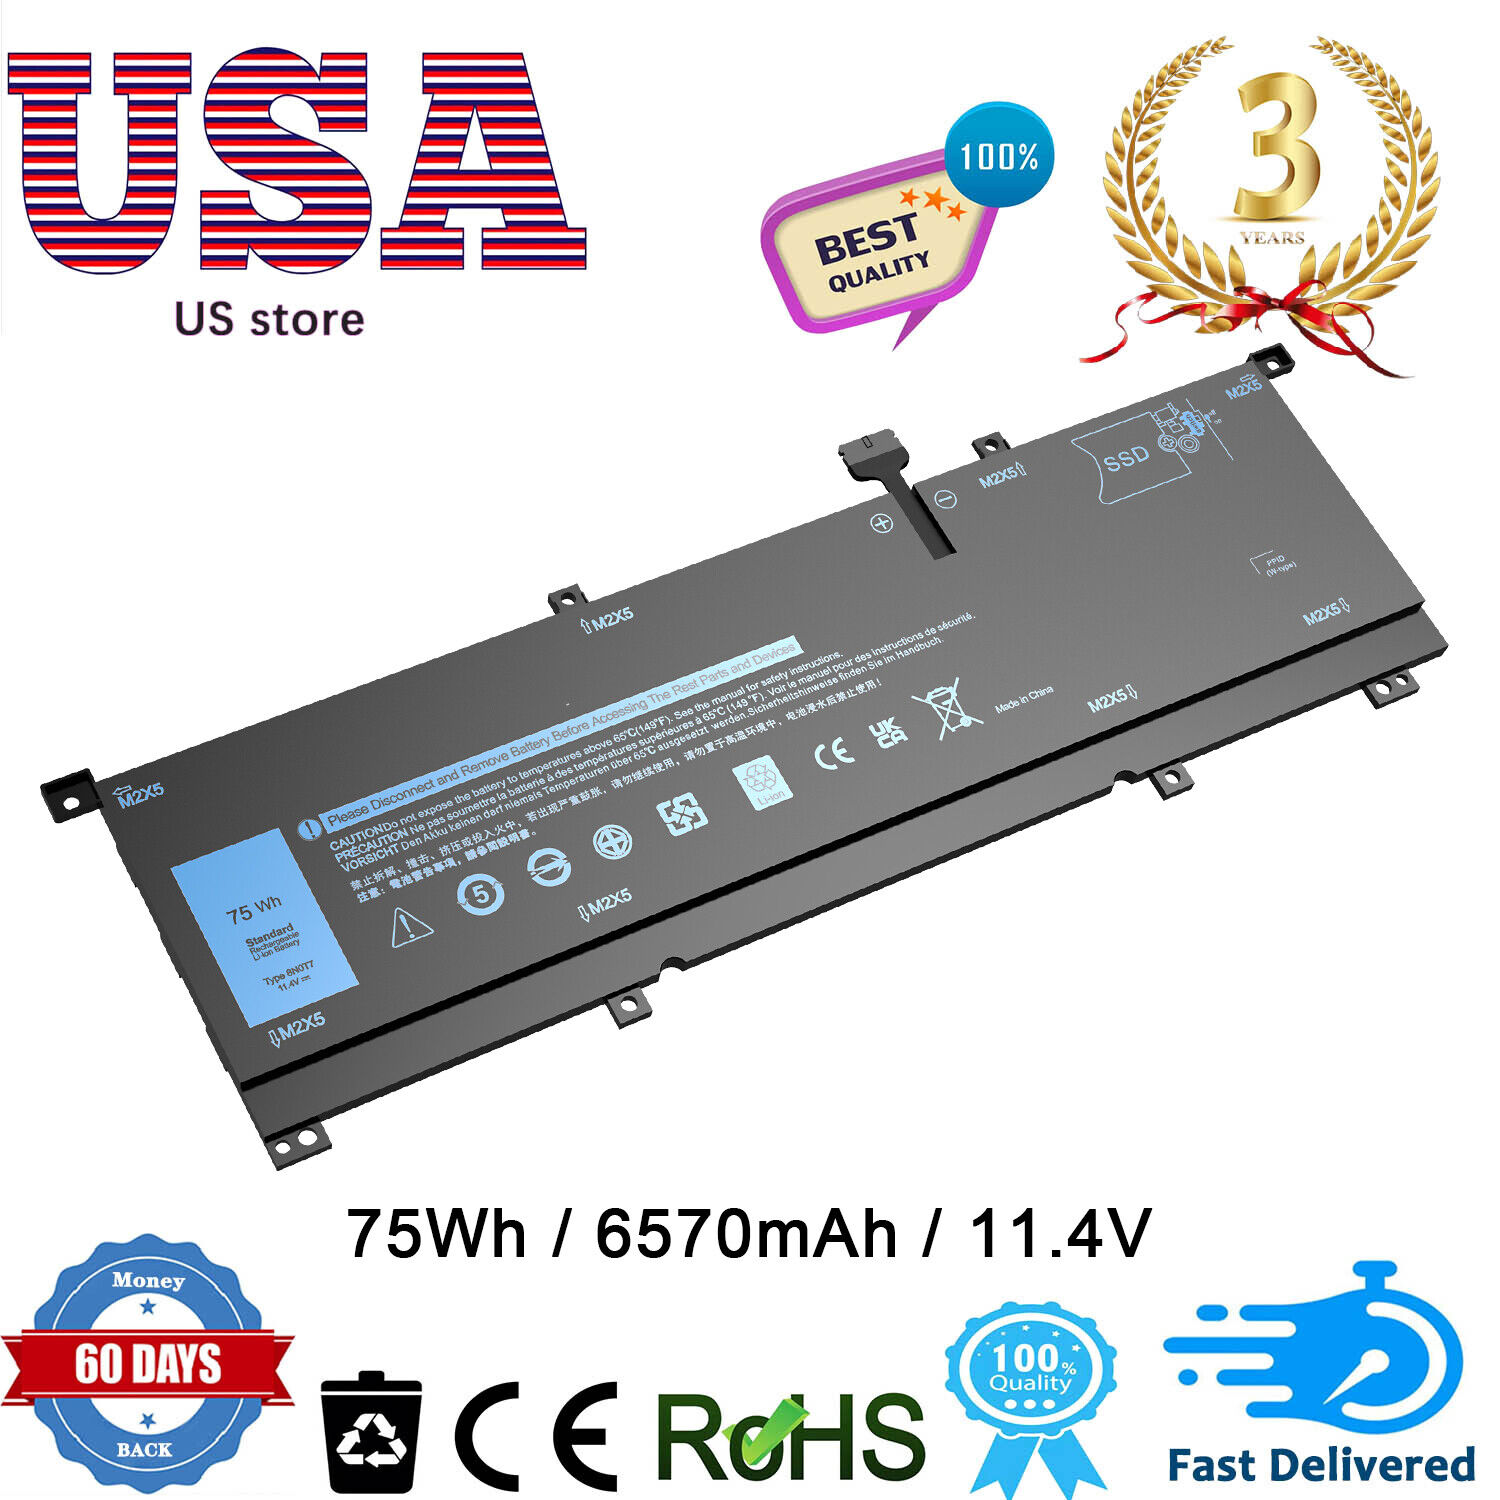 8N0T7 Laptop Battery 75Wh 11.4V 6-Cell for Dell XPS 15-9575 15-9575-D2801TS USPS